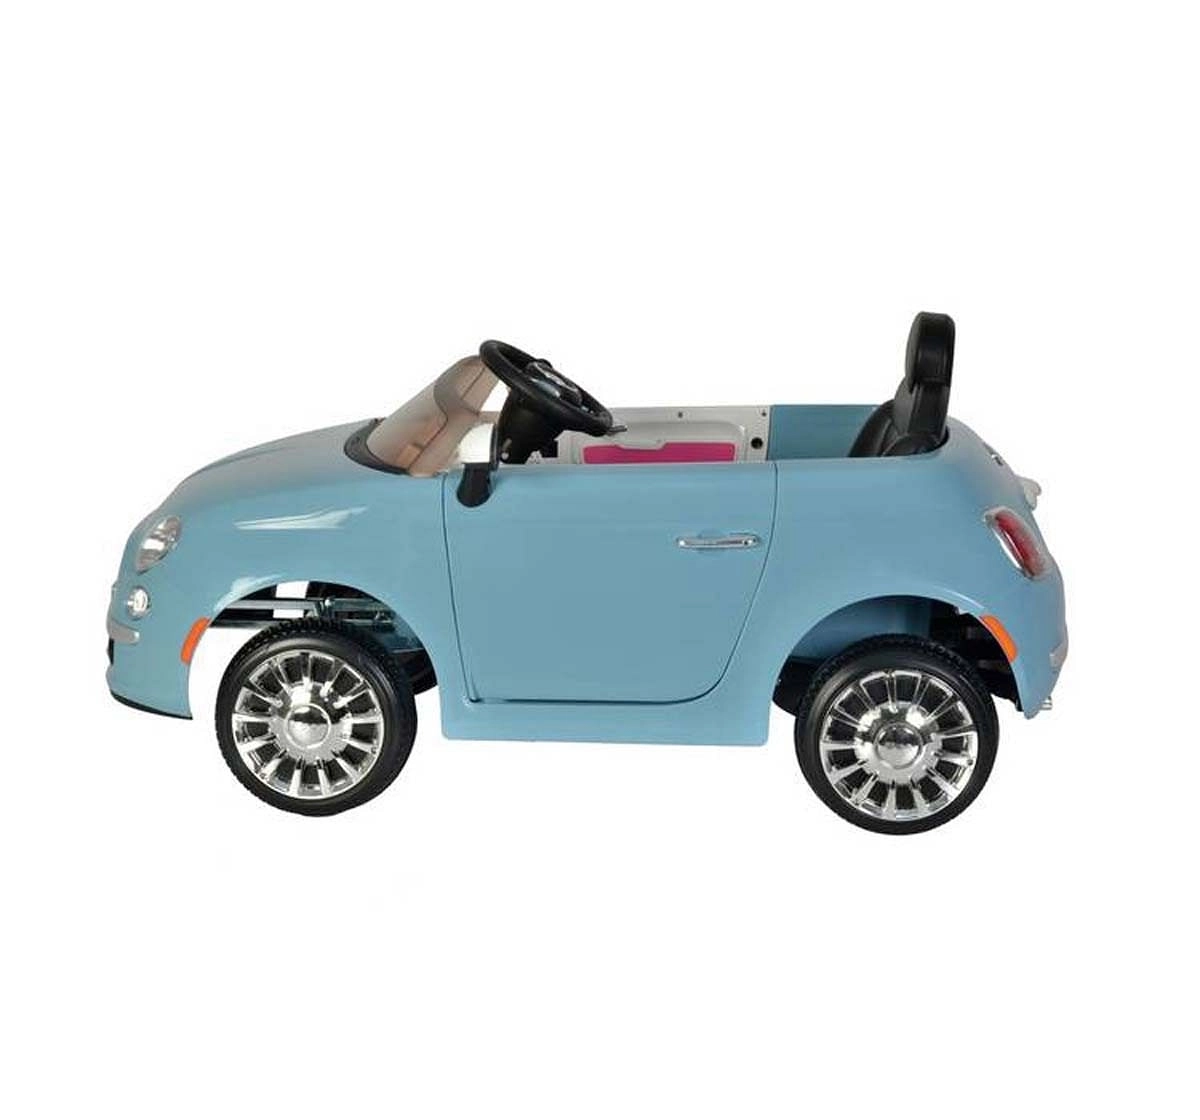 Chilokbo Fiat 500 Battery Operated Ride-on Car Blue Battery Operated Rideons for Kids age 18M +